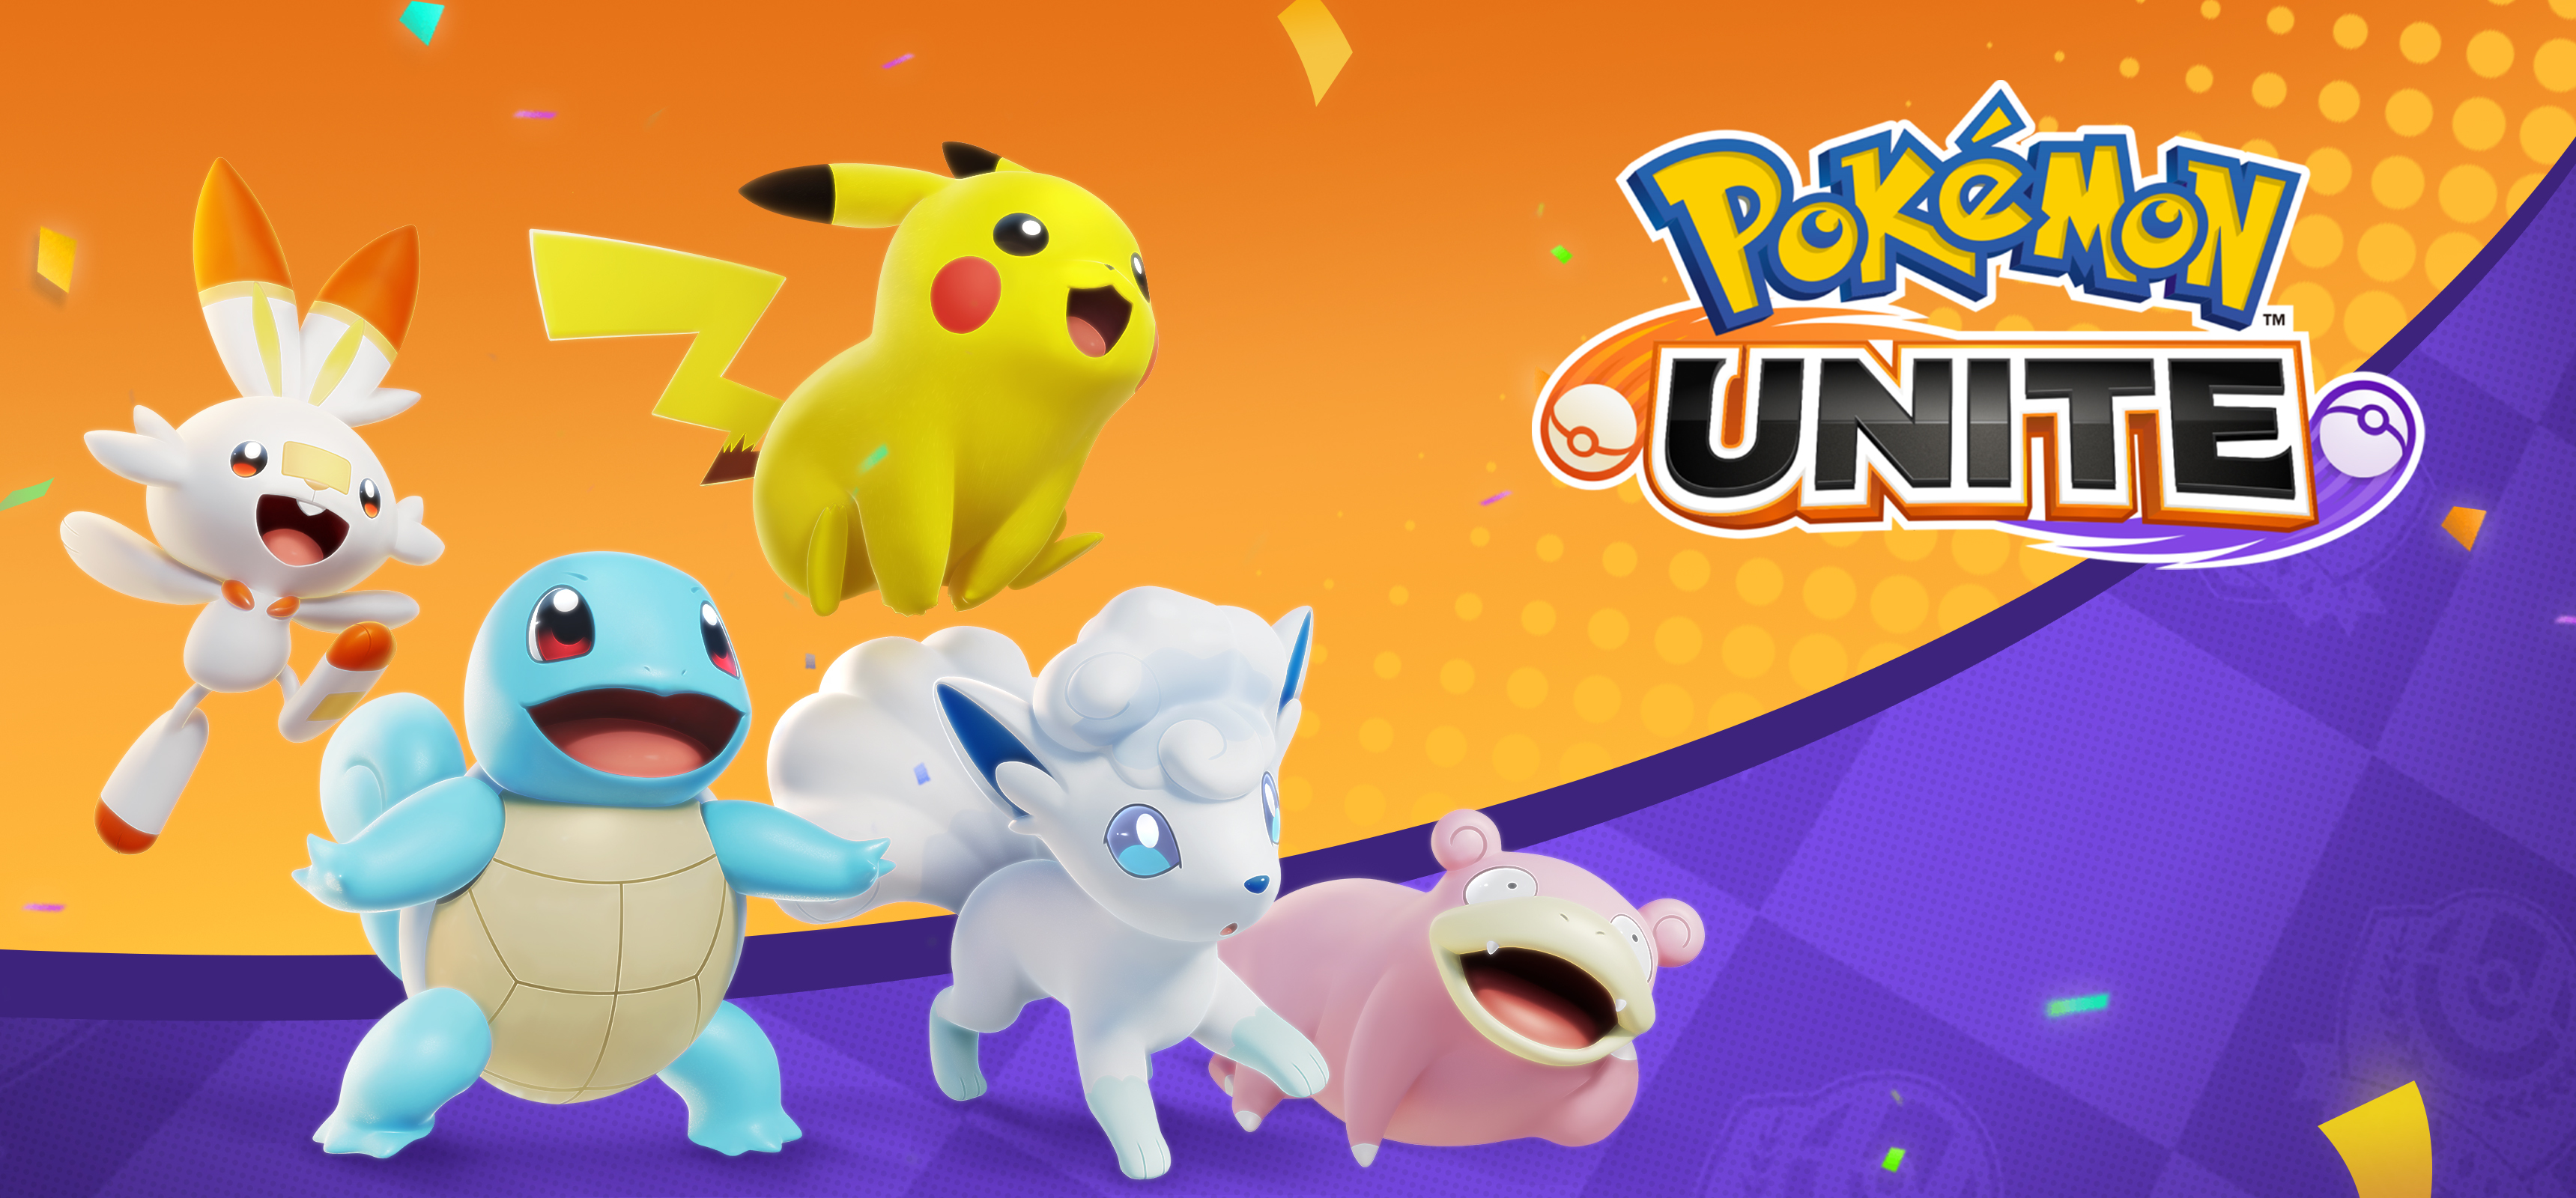 Pokémon UNITE on X: "Pre-download for #PokemonUNITE on Switch is now  available! Pre-download now and get into the action even faster this  Wednesday! ➡️https://t.co/S2k3xaqmtj https://t.co/hXZ2nTvKUd" / X